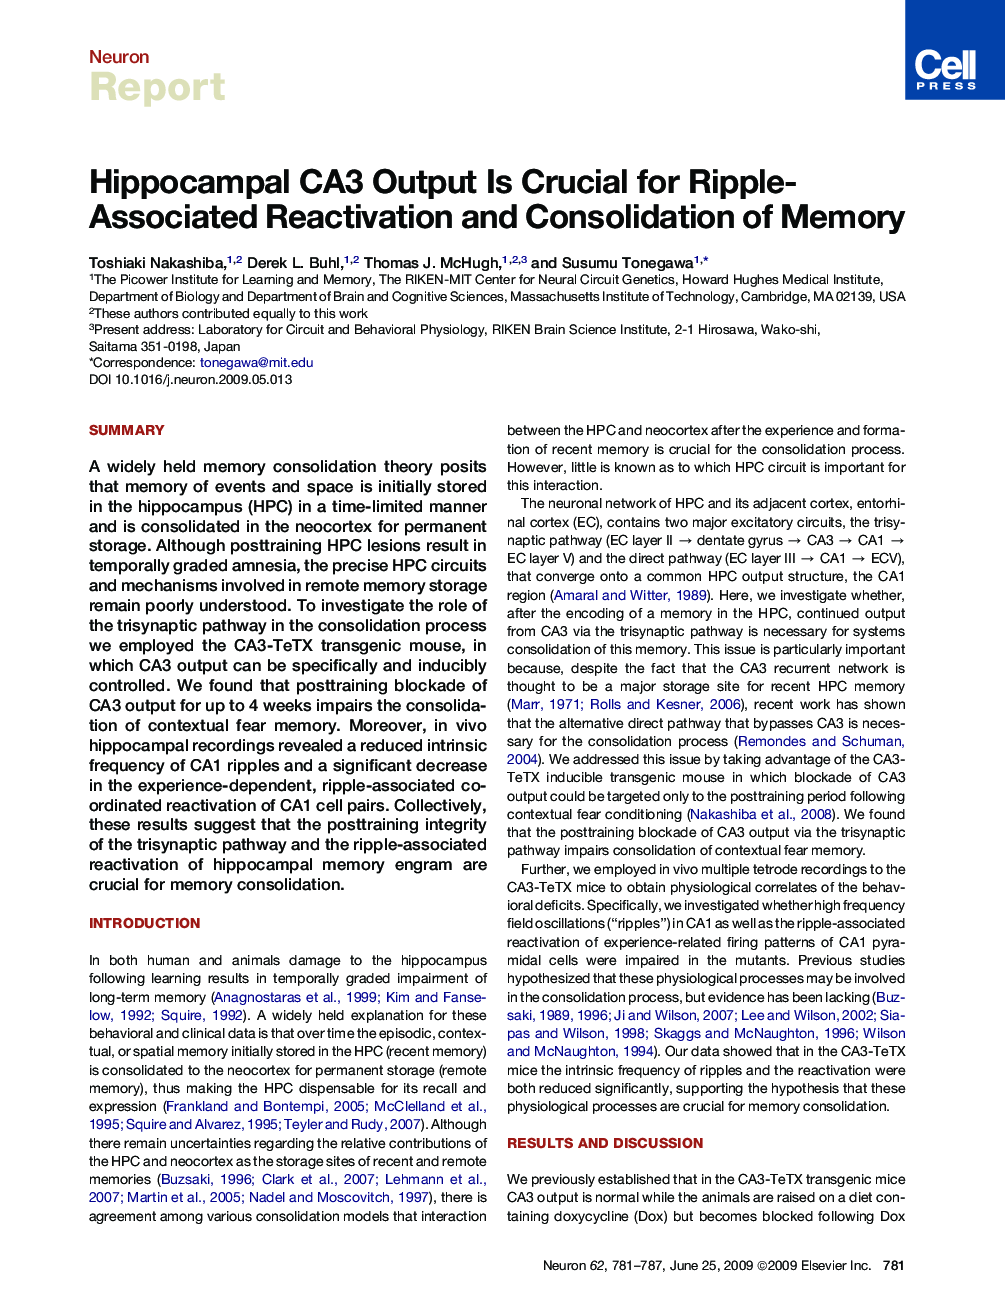 Hippocampal CA3 Output Is Crucial for Ripple-Associated Reactivation and Consolidation of Memory